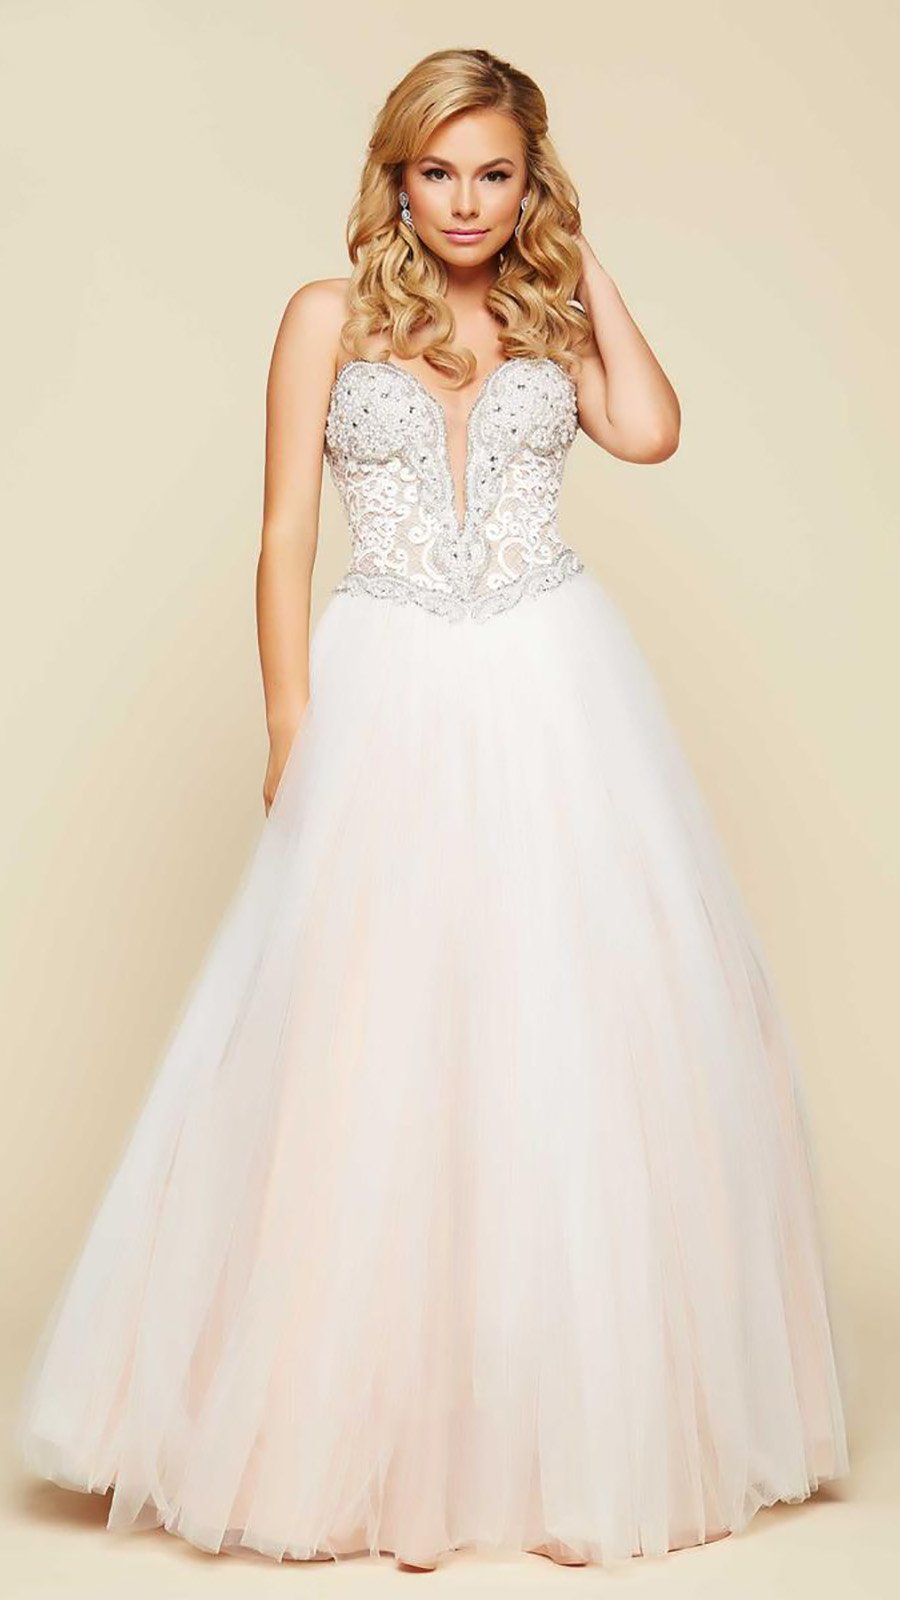 Mac Duggal Embellished Strapless Long Gown in Ivory/Nude 65357H - 1 pc Ivory/Nude in Size 10 Available